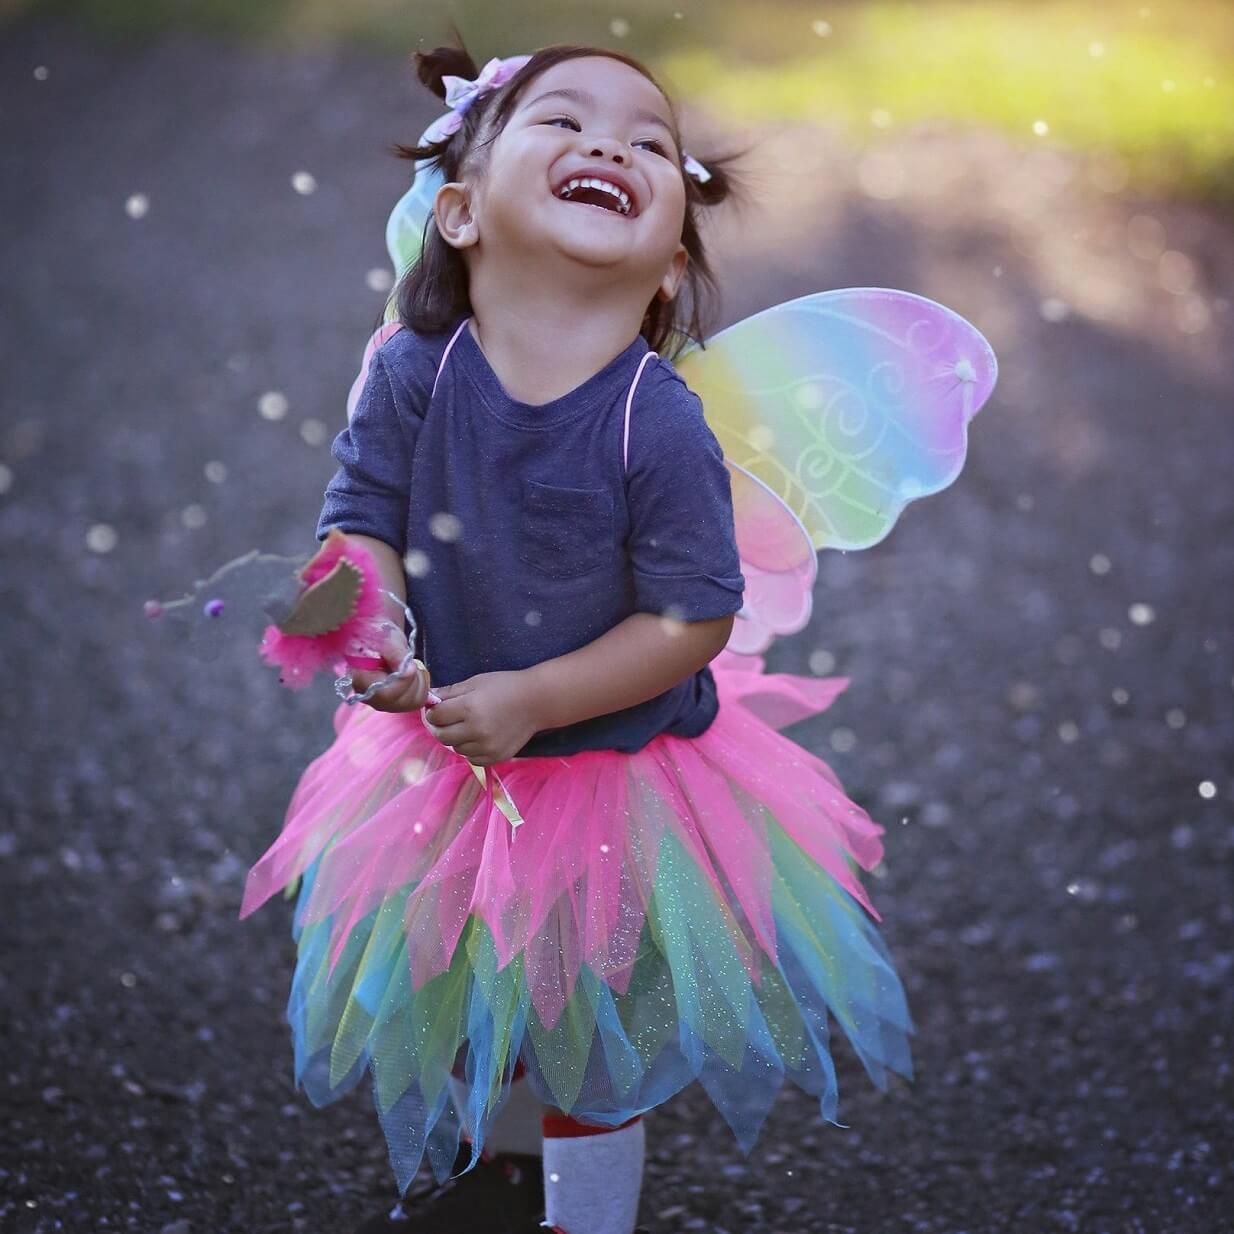 Girl laughing in Fairy Set